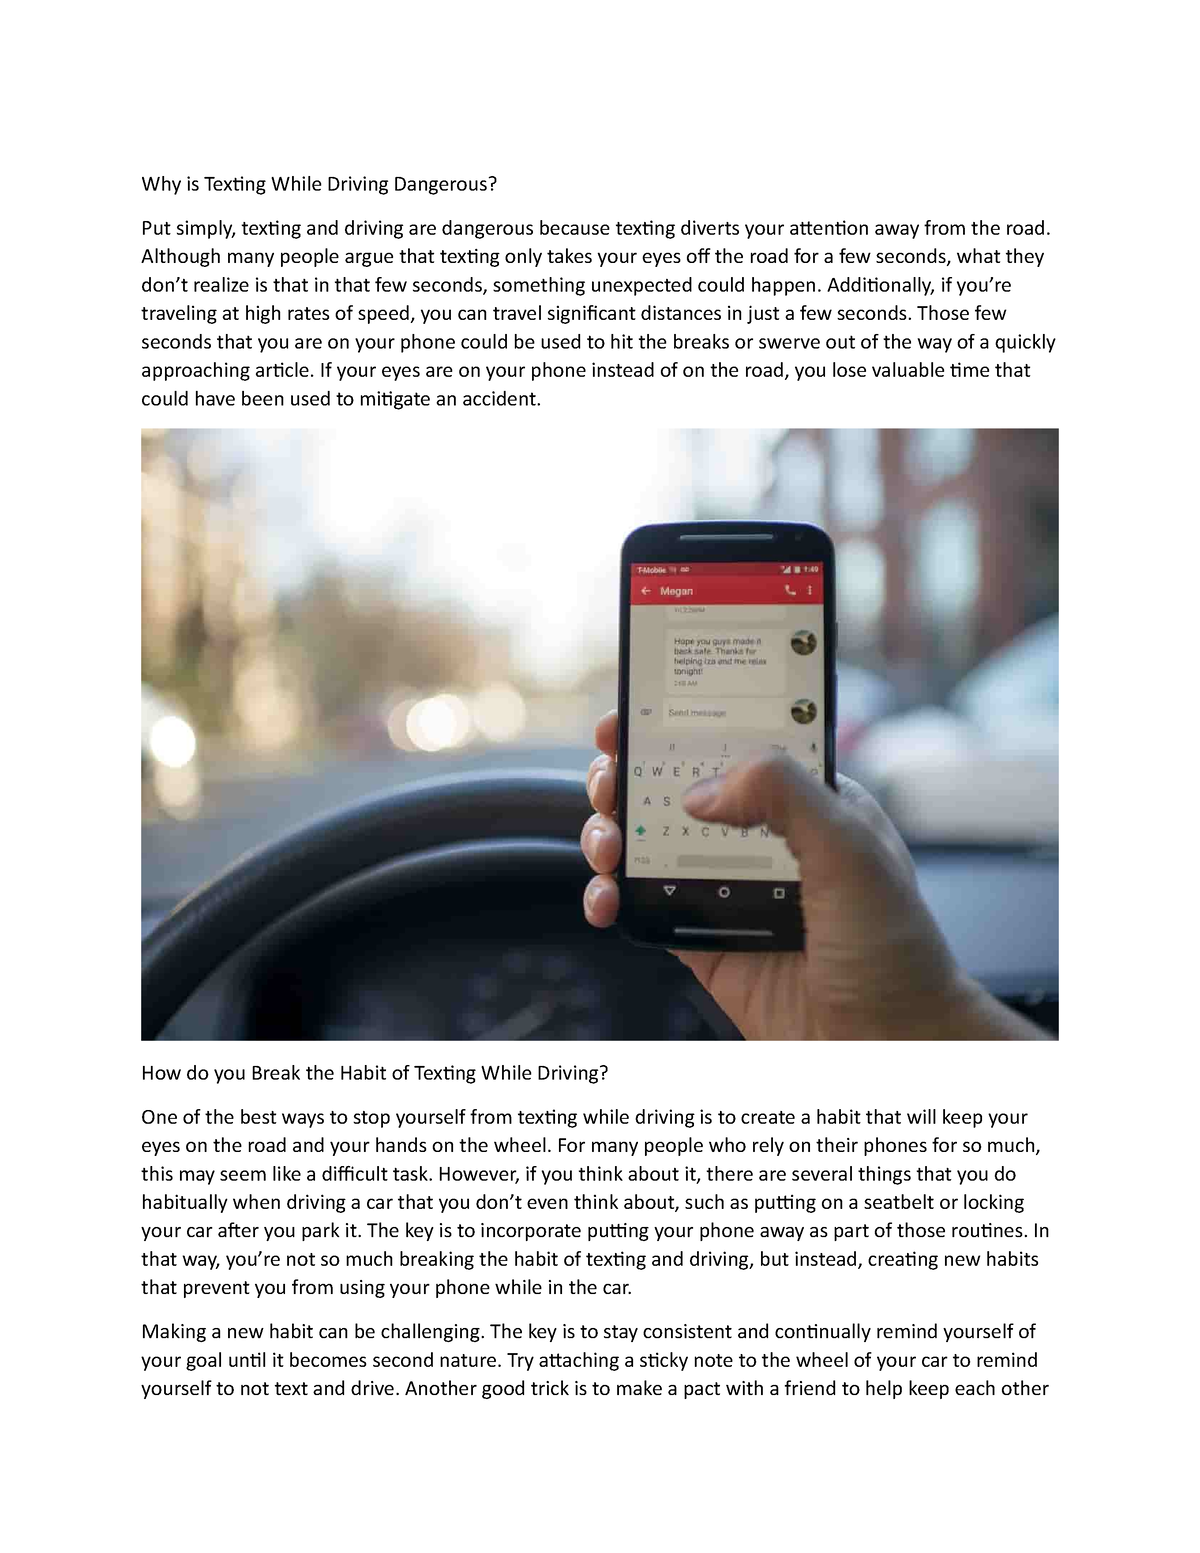 texting and driving essays argumentative